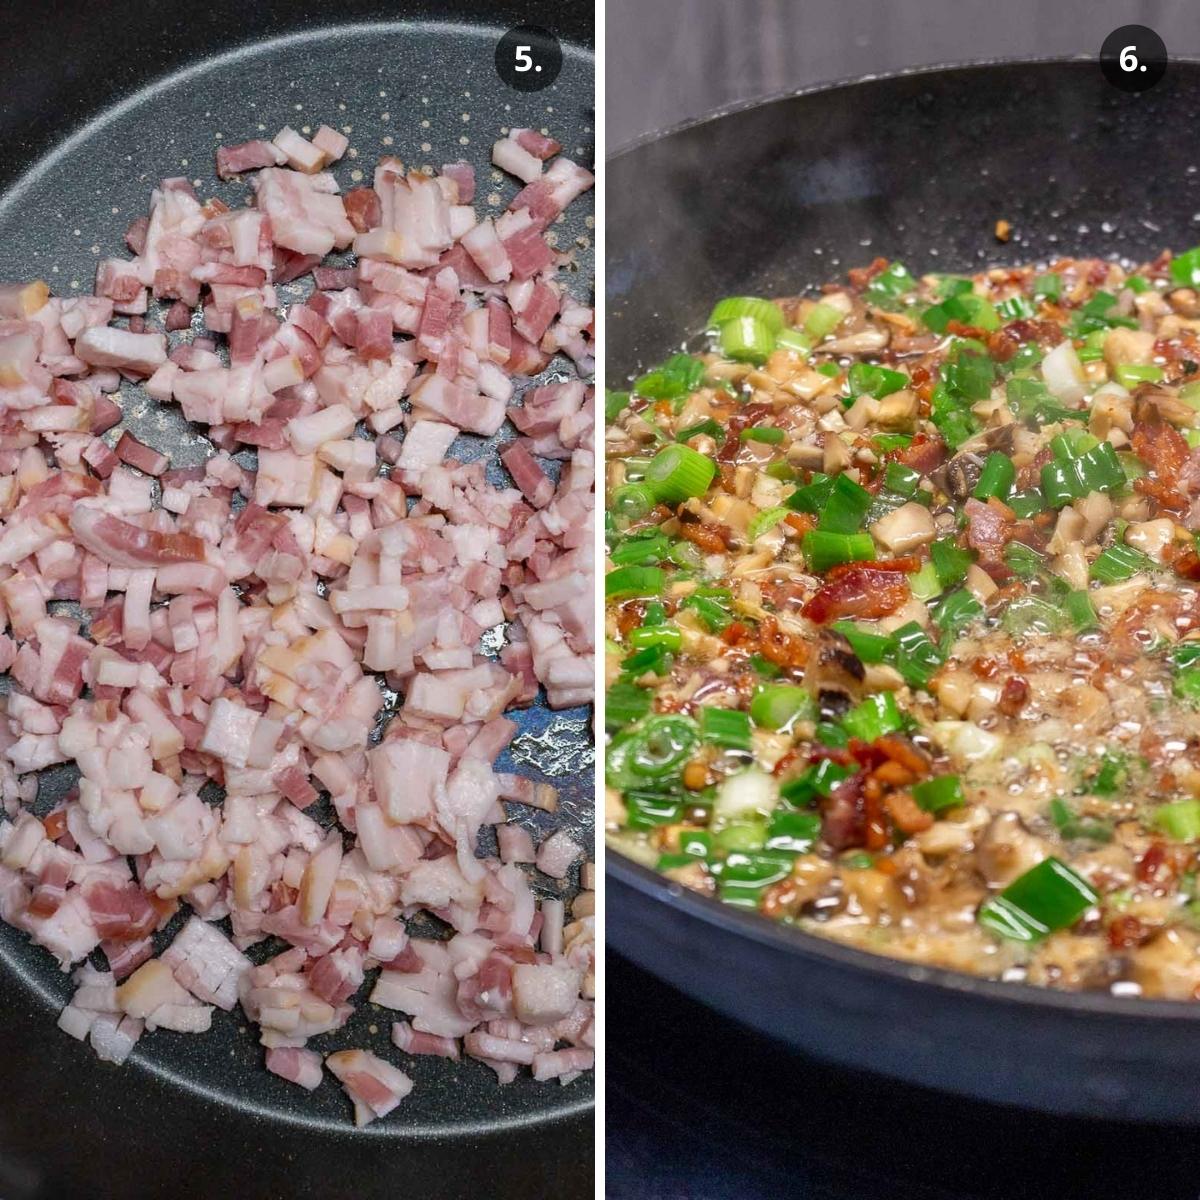 Bacon frying with mushrooms and aromatics.